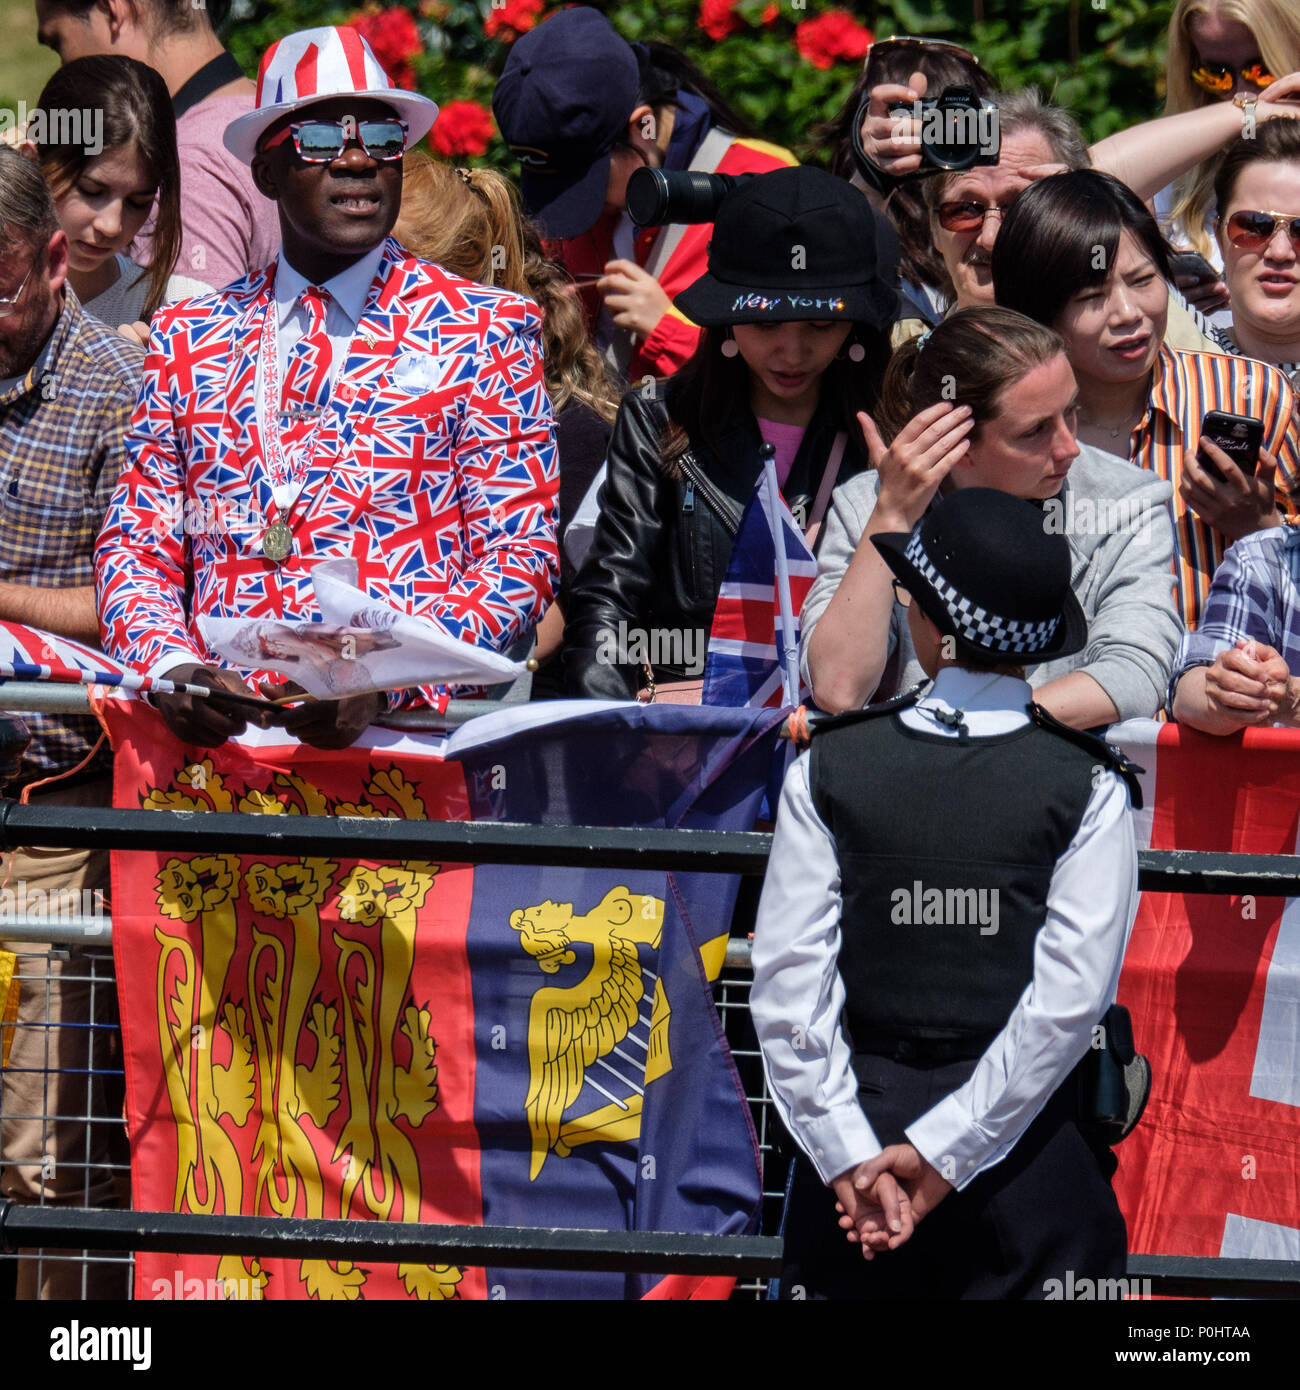 Crowds gather on the Mall for Trooping the Colour and Queens Birthday Parade on Saturday 9 June 2018 in Buckingham Palace , London. Pictured: A spectator in a union jack suit. Picture by Julie Edwards. Credit: Julie Edwards/Alamy Live News Stock Photo